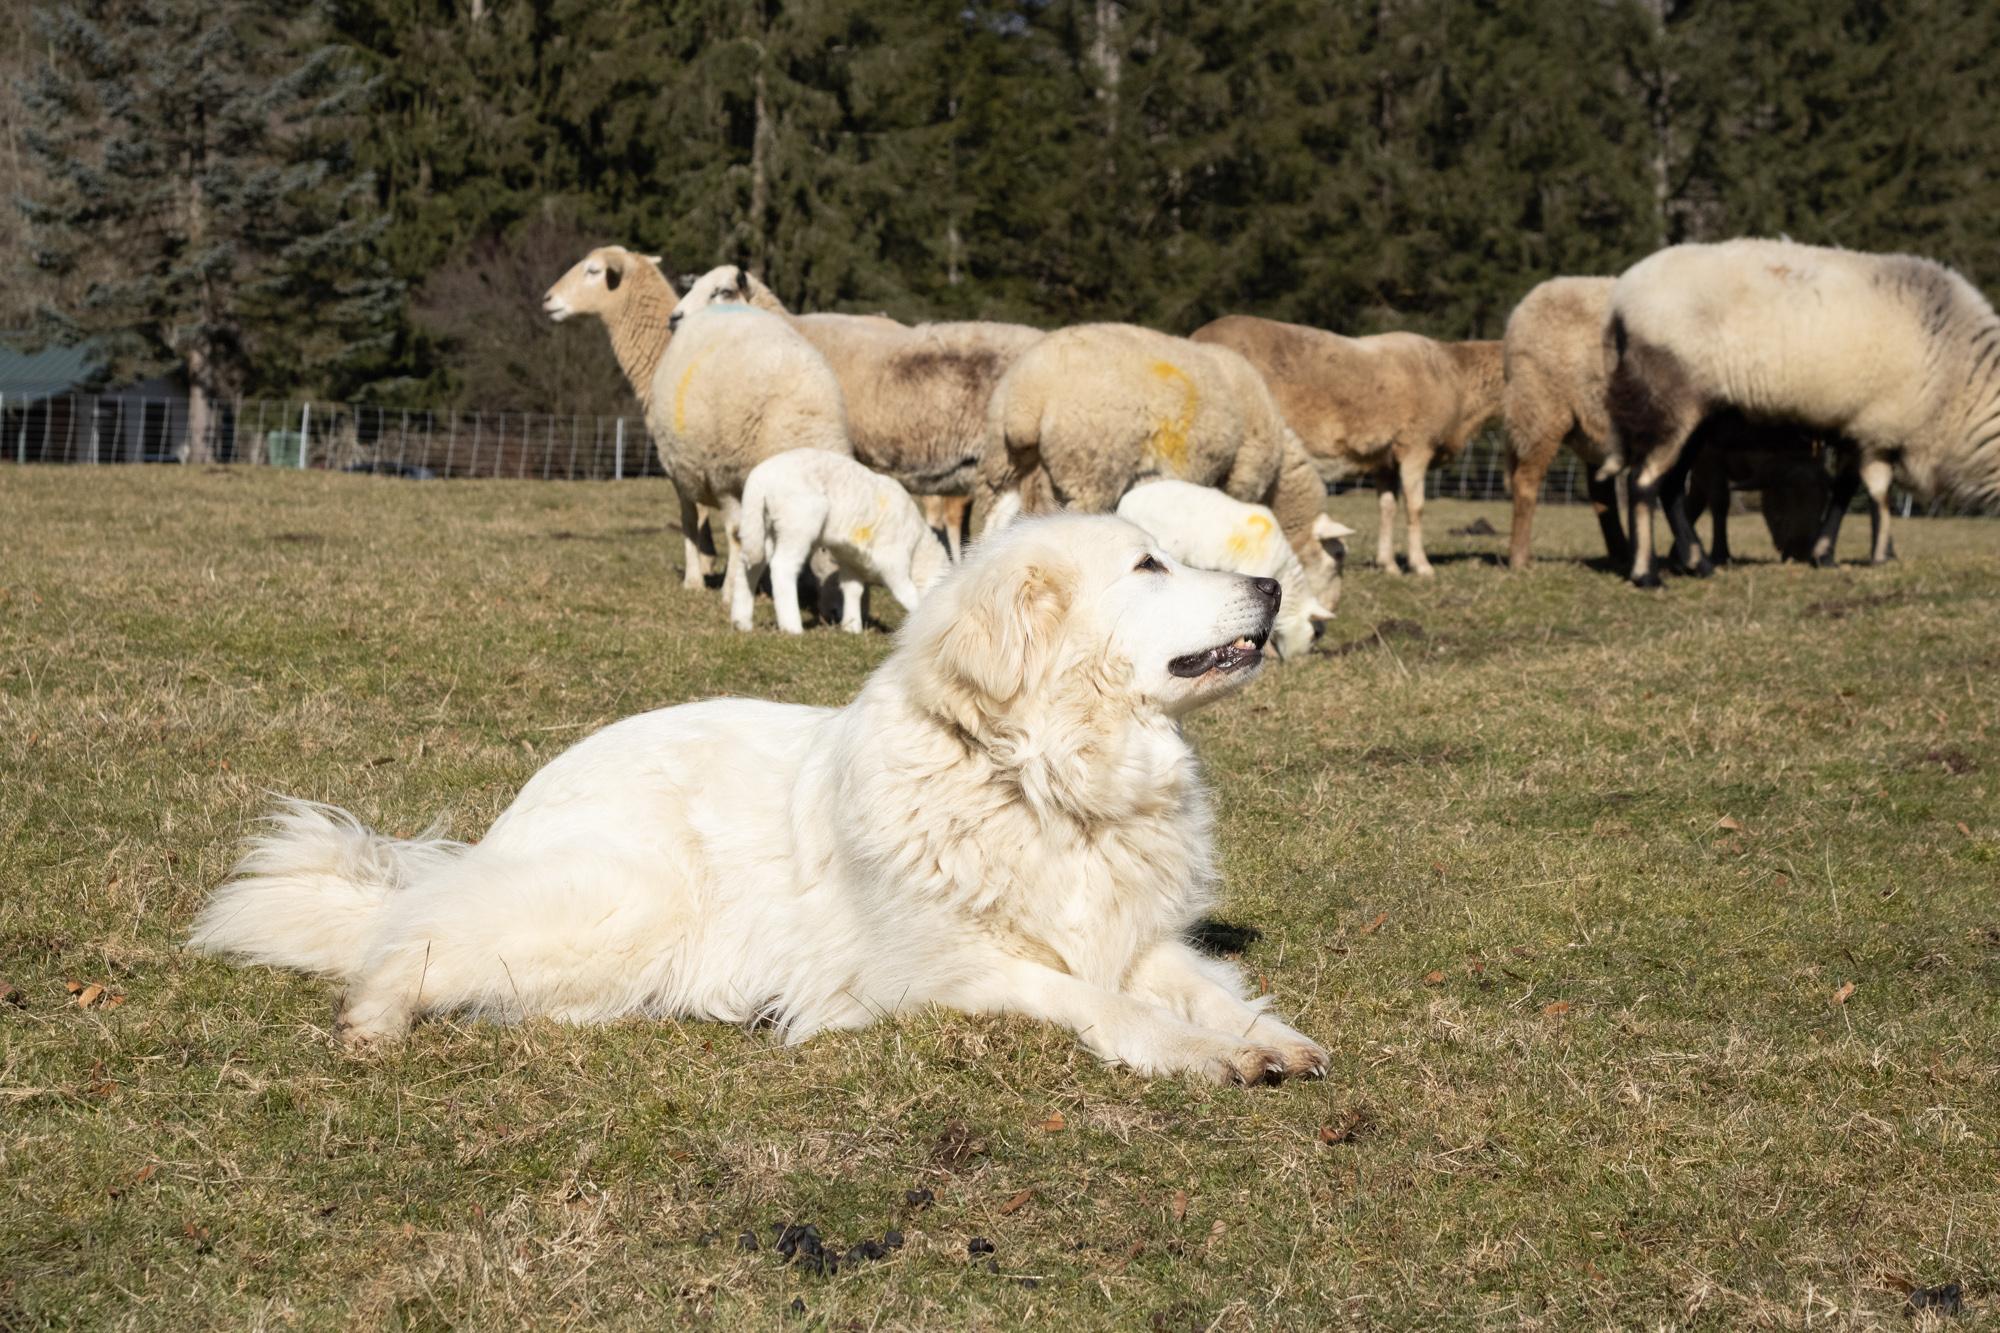 Calamity Jane lying in pasture with sheep